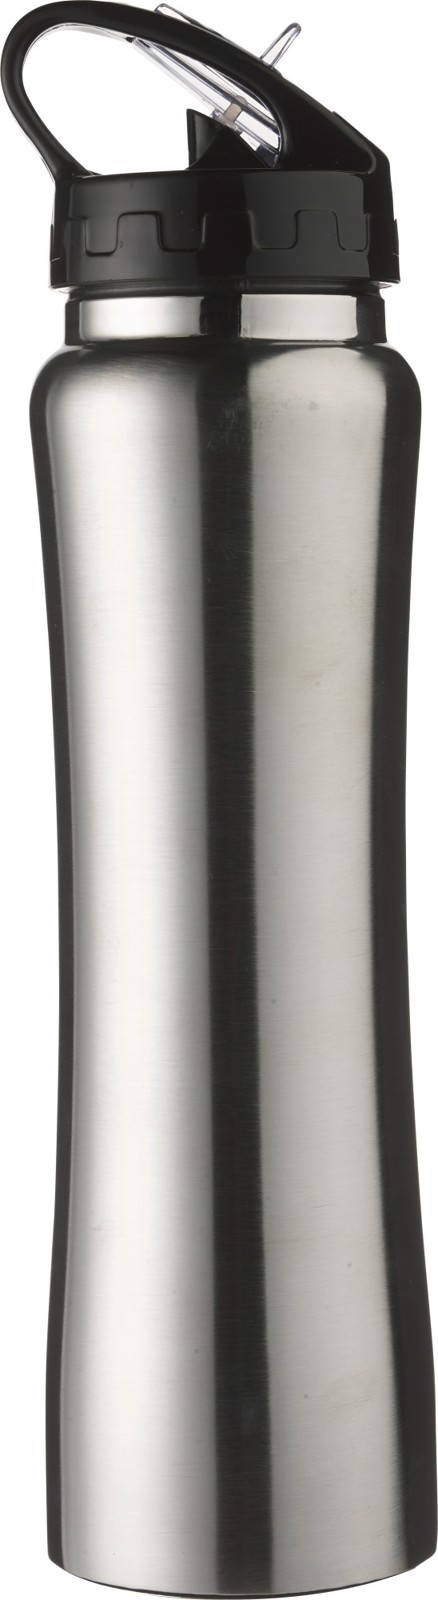 Stainless steel double walled flask - Silver